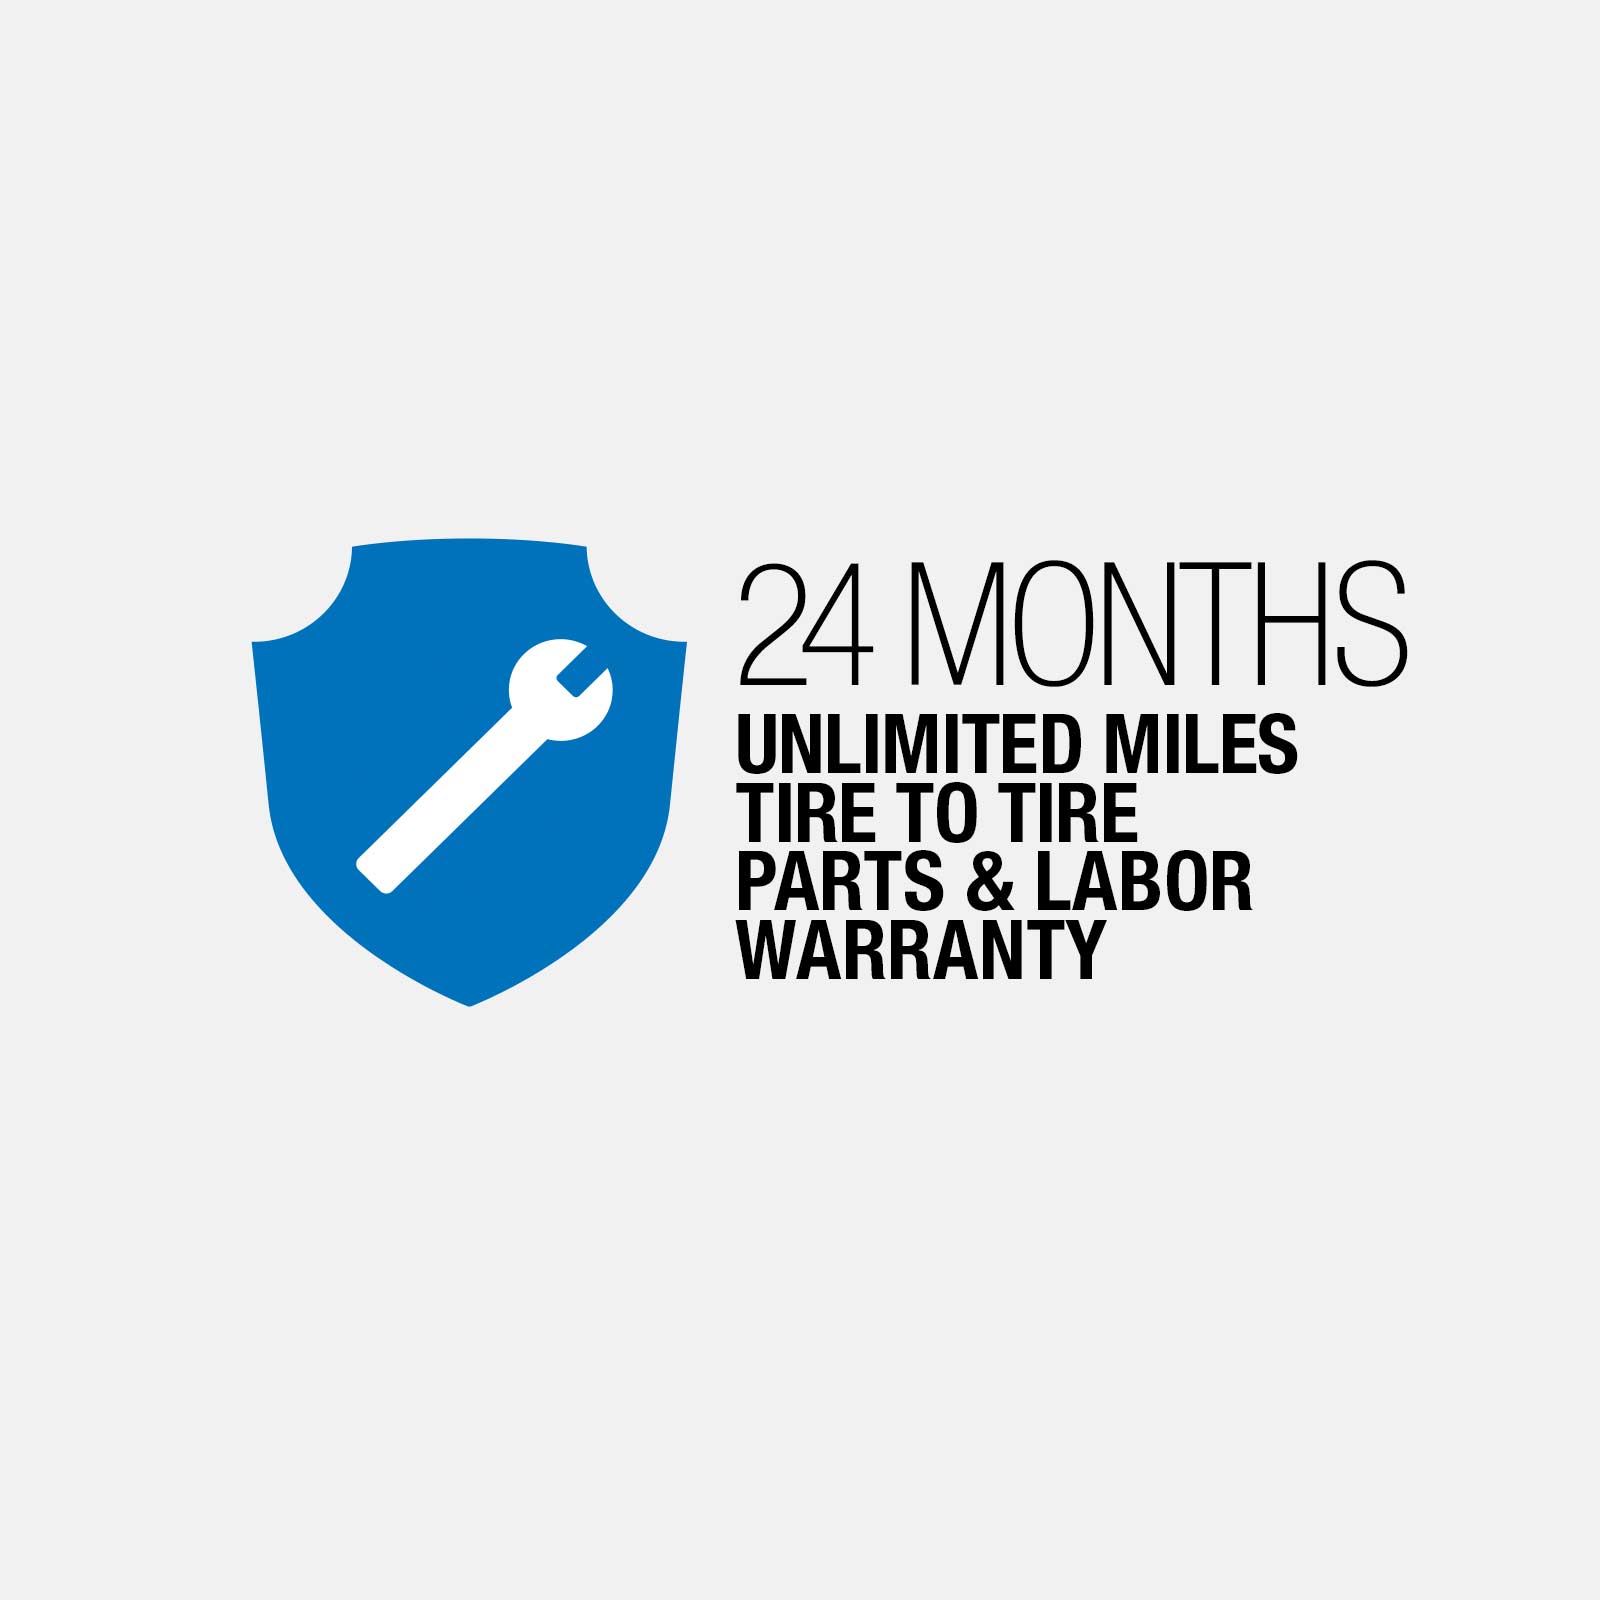 New Lance 24 Months Warranty - Unlimited Miles with tire to tire Parts and Labor Warranty Assurance.